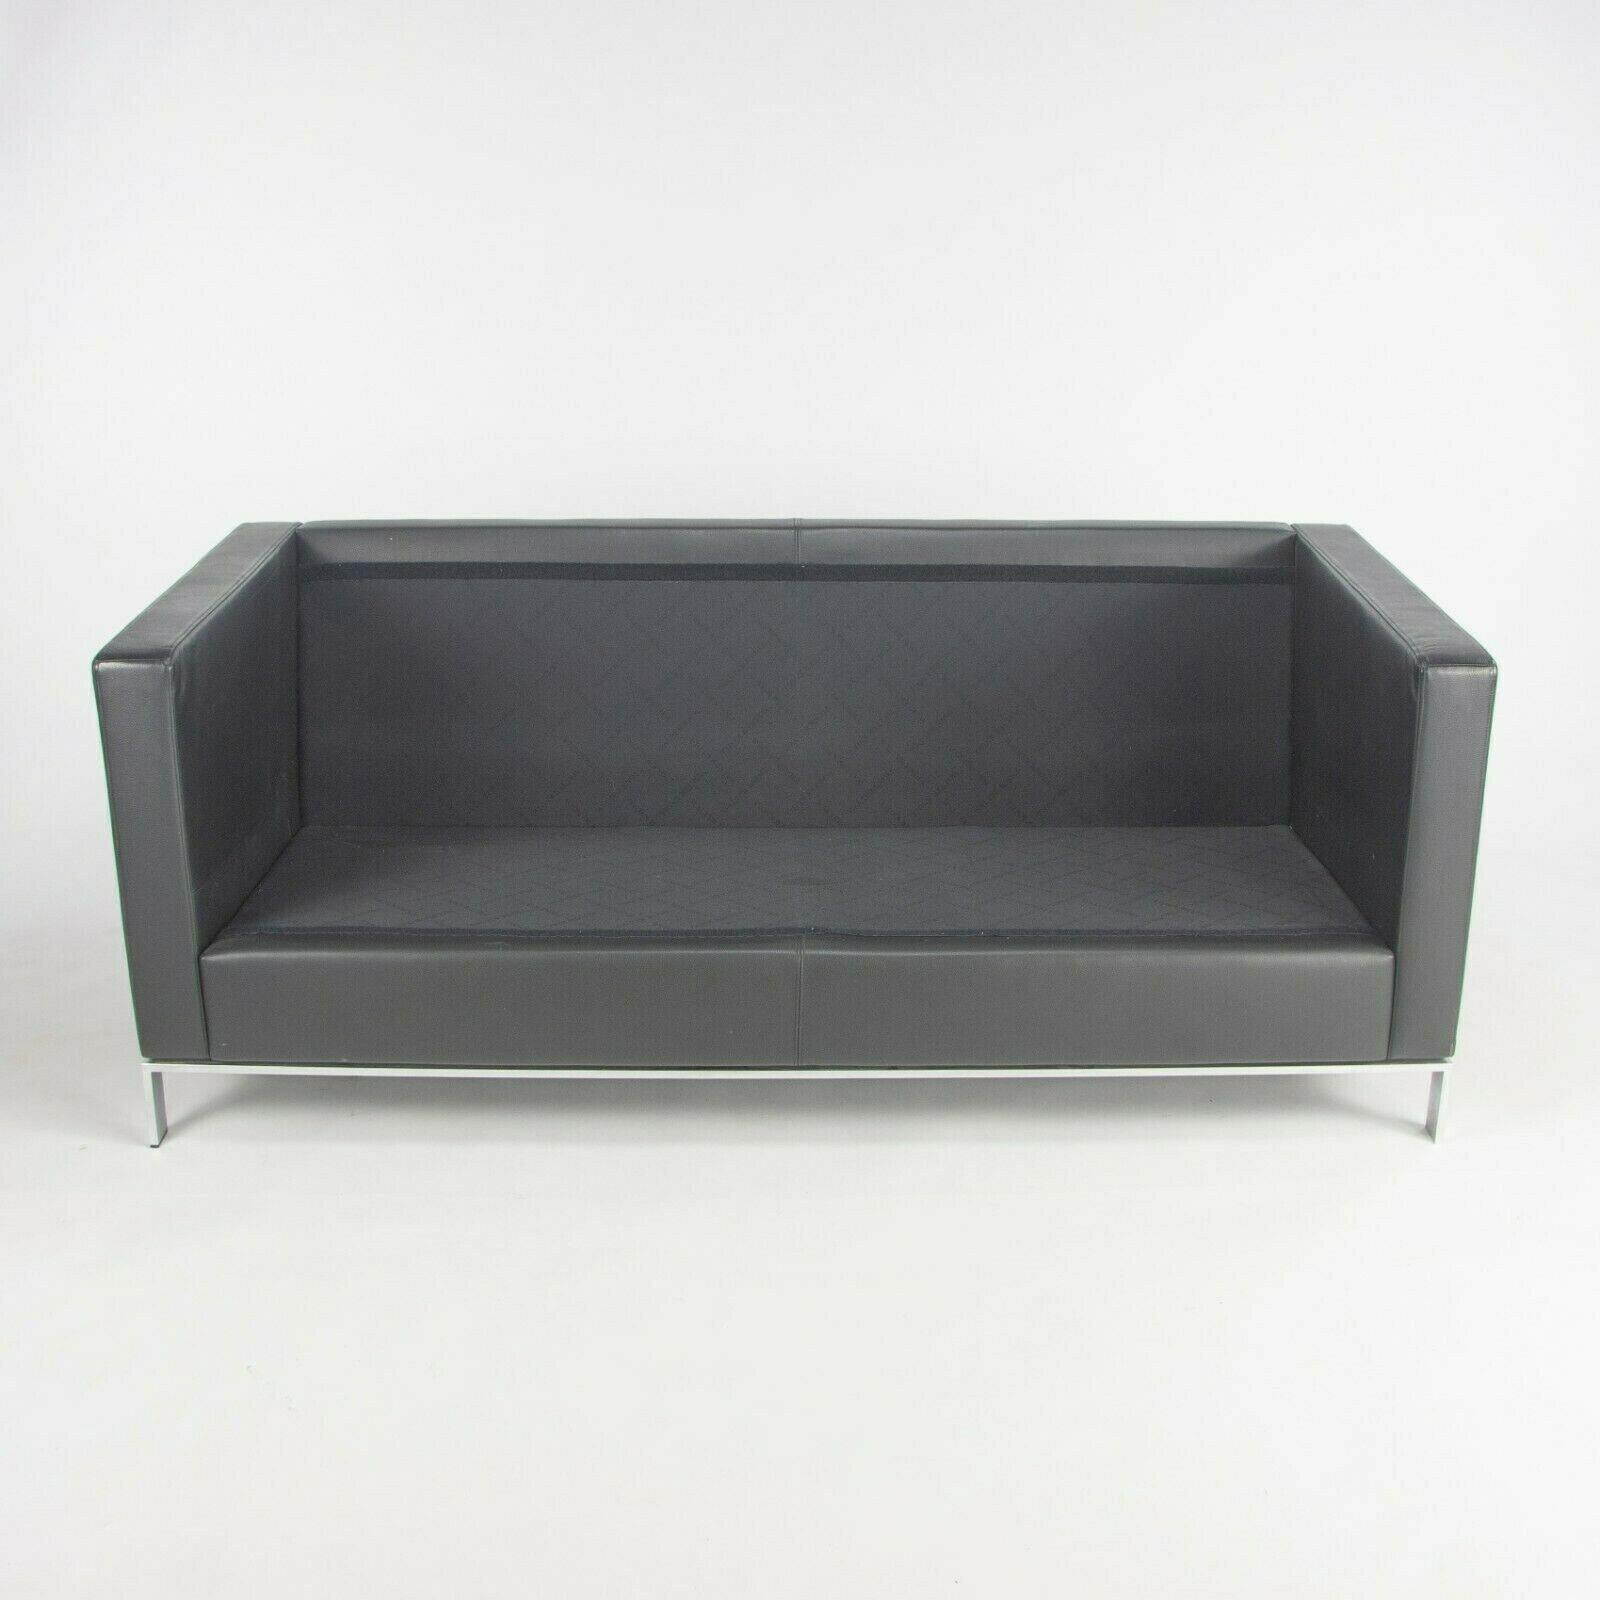 Contemporary Lord Norman Foster Model 500 Black Leather 2 Seat Settee Sofa for Walter Knoll For Sale